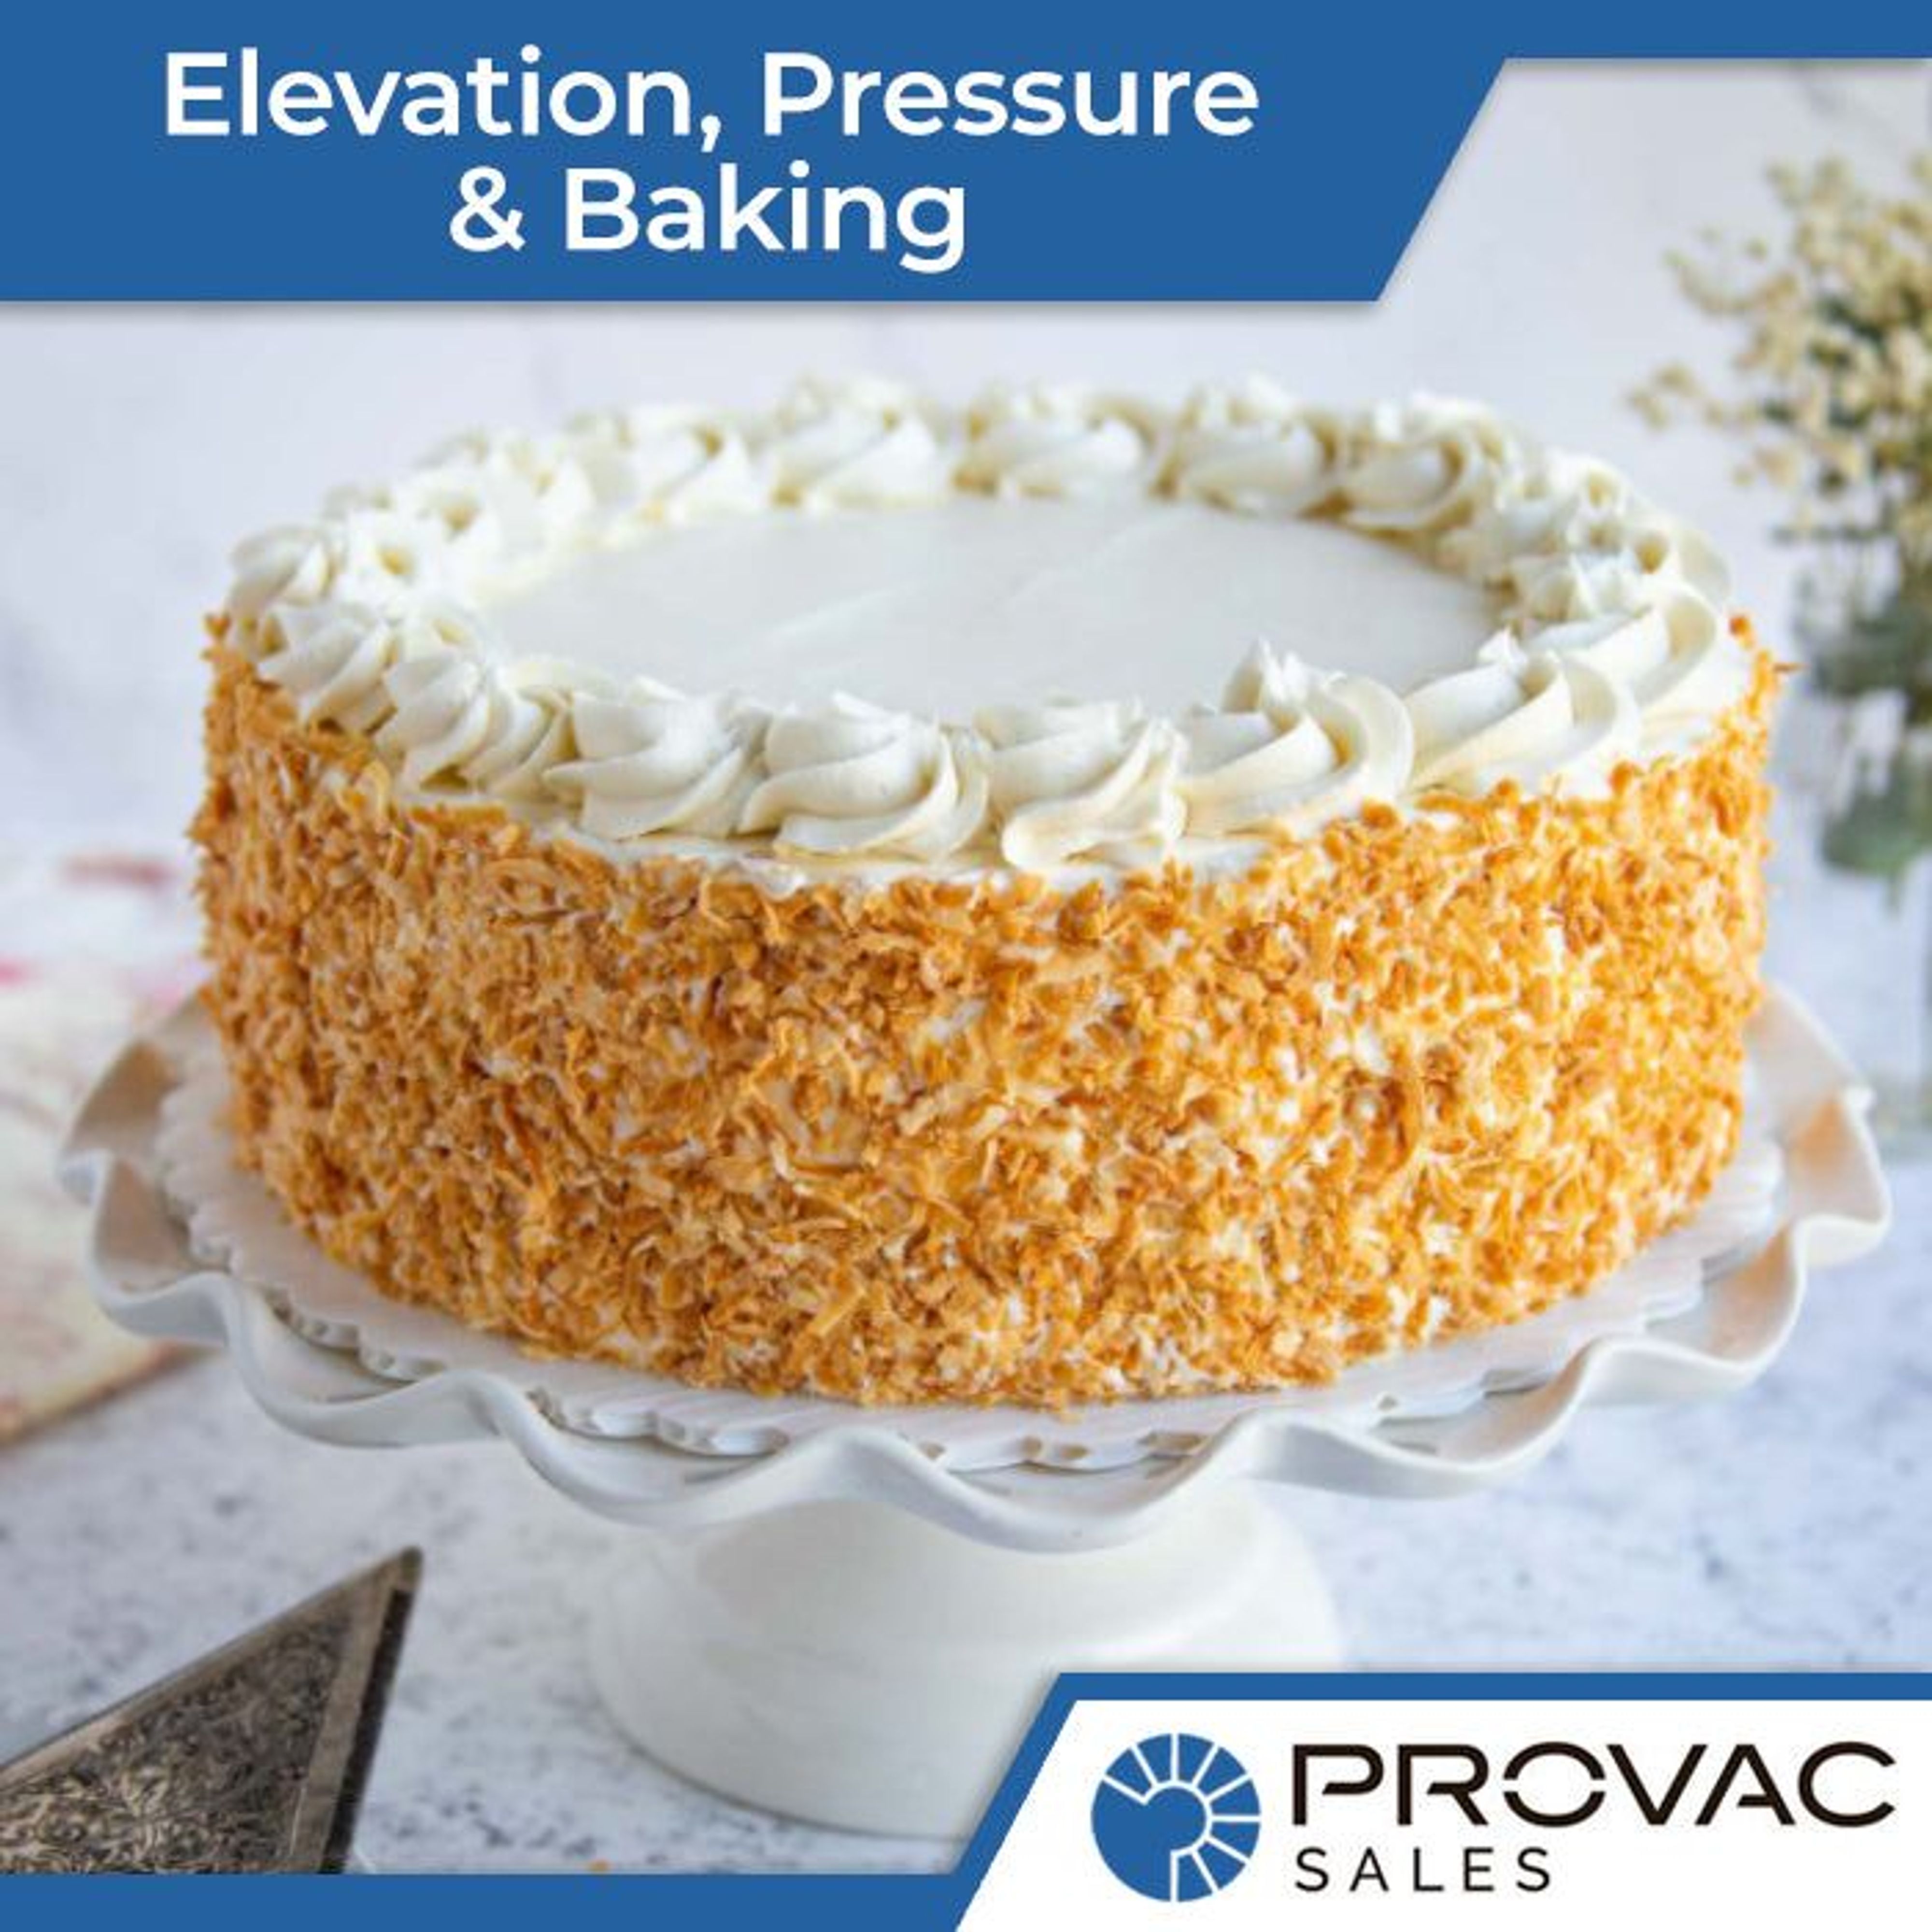 Elevation, Atmospheric Pressure, and Baking Background